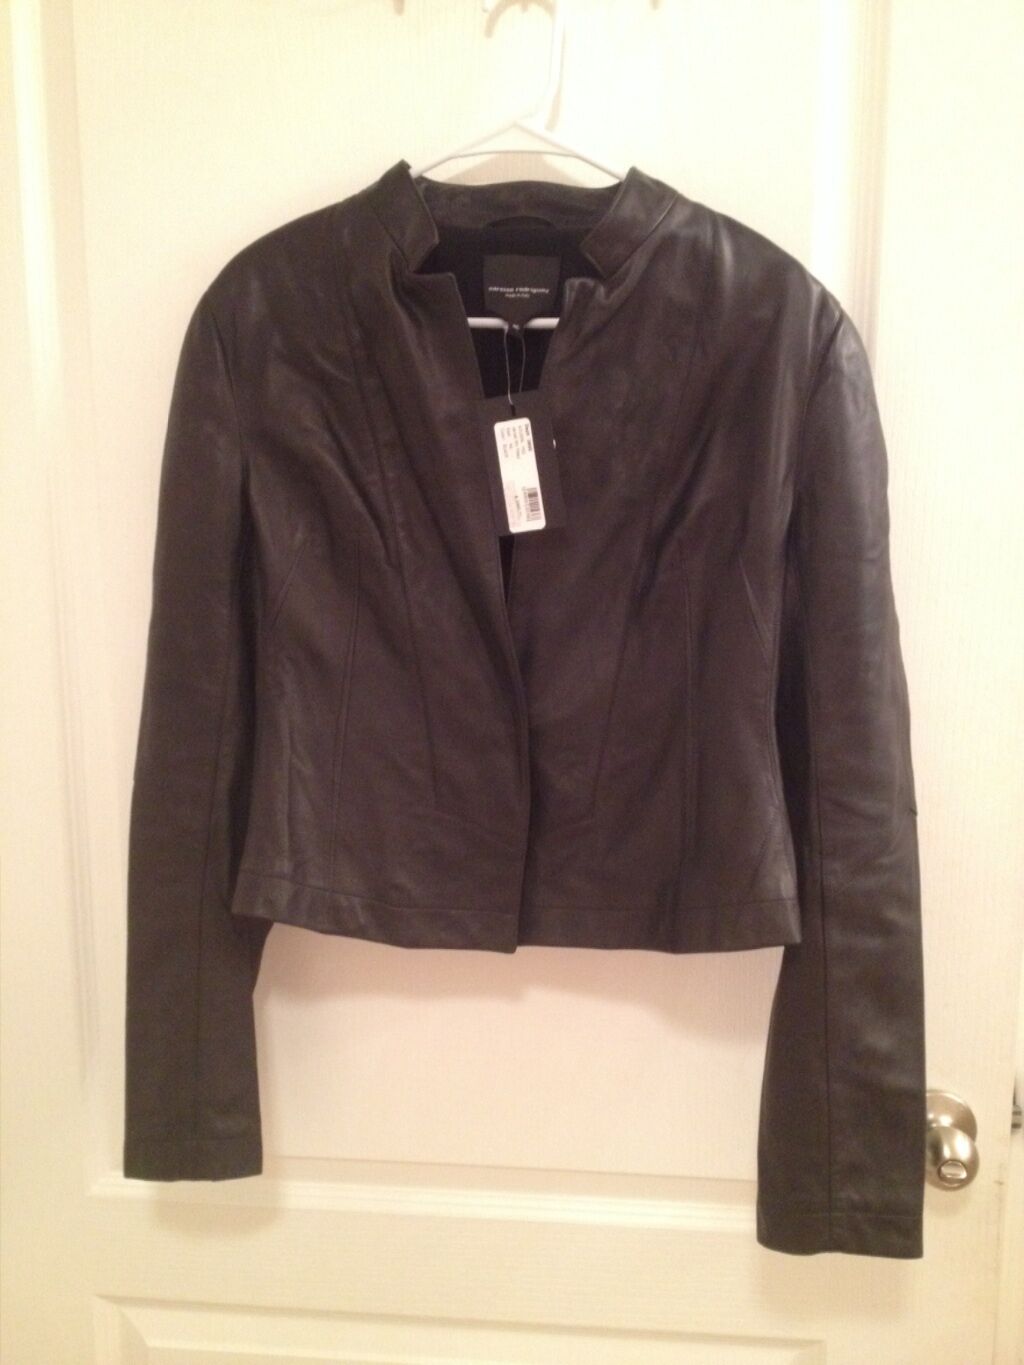  $3,995 nwt NARCISCO RODRIGUEZ  Womens Black Lambskin Fitted leather Jacket  46 